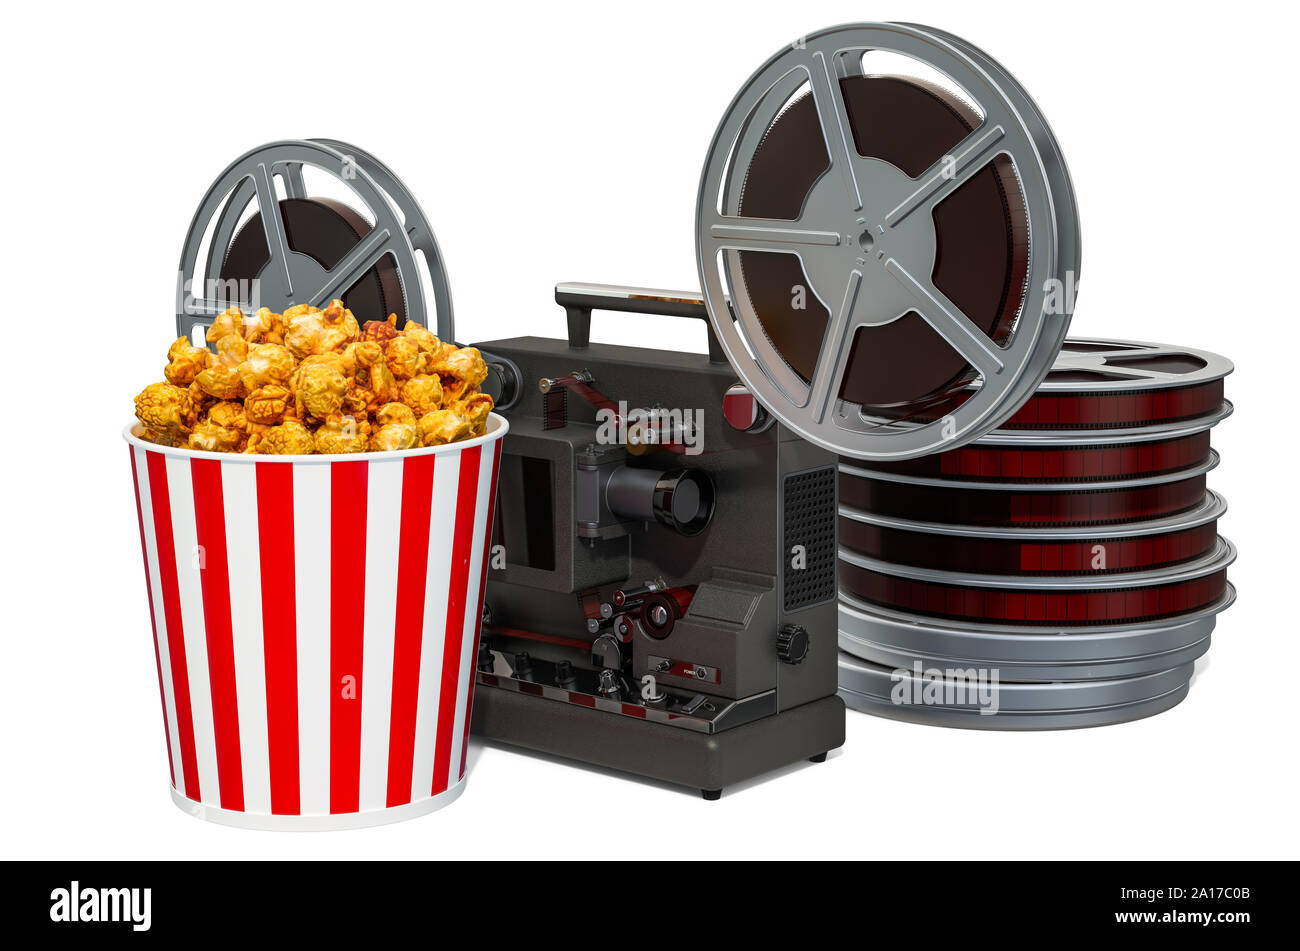 https://c8.alamy.com/comp/2A17C0B/cinema-concept-cinema-projector-and-movie-reels-with-popcorn-container-3d-rendering-isolated-on-white-background-2A17C0B.jpg